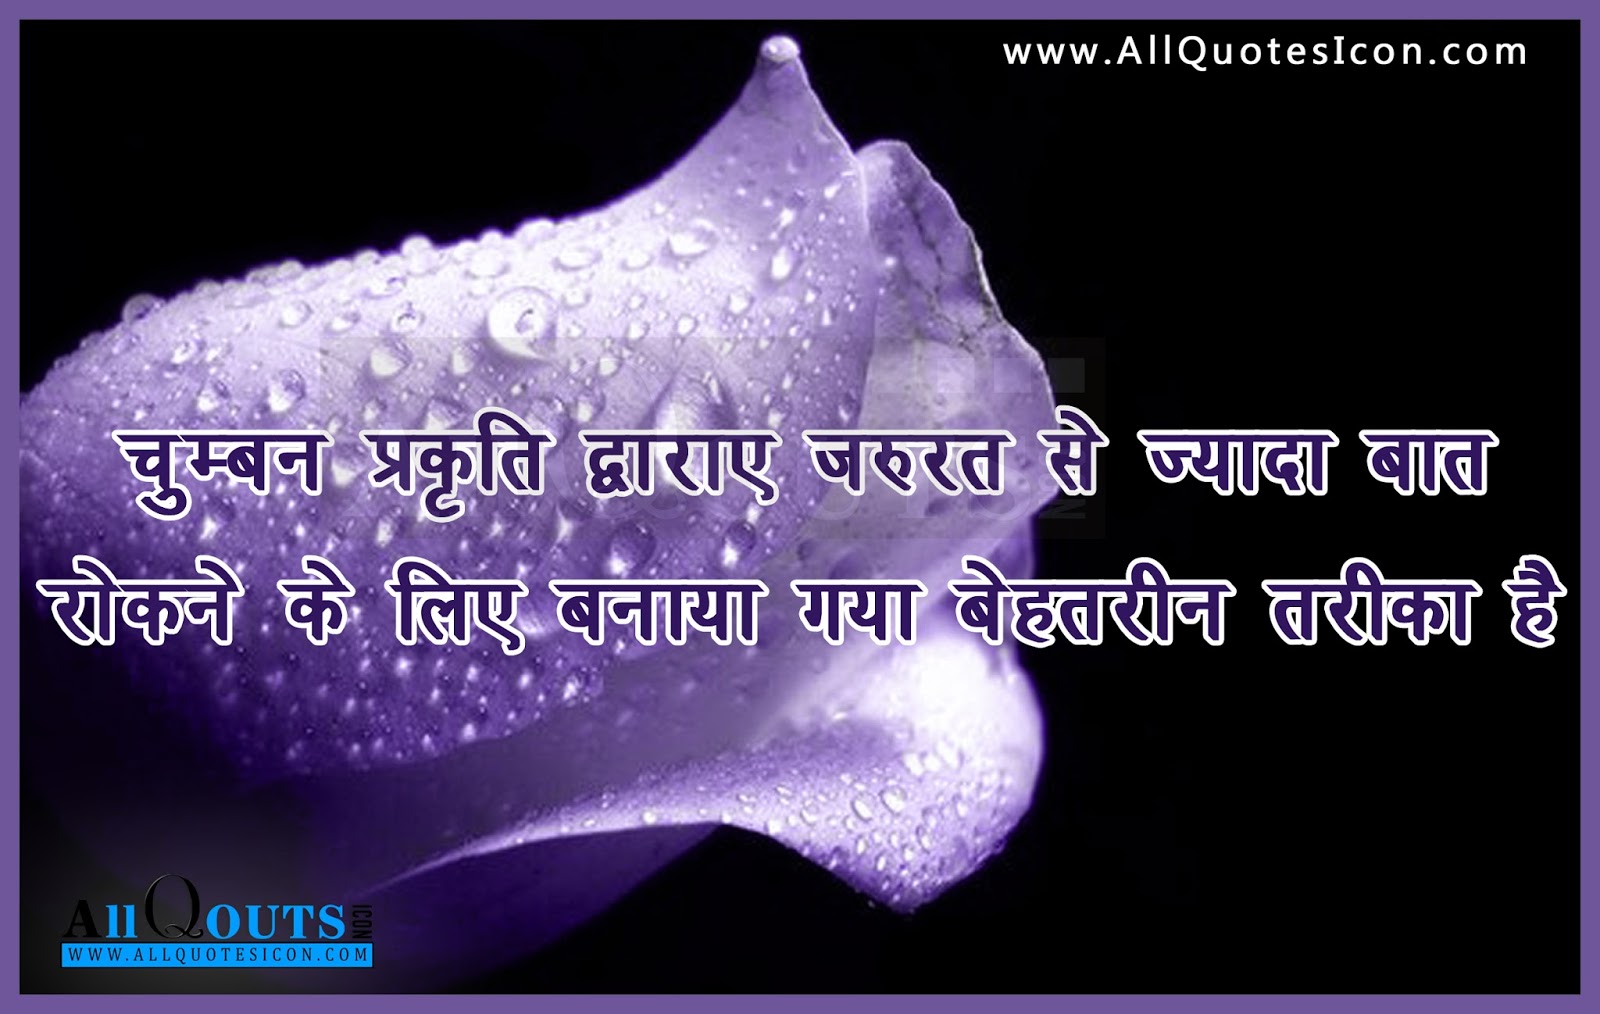 Hindi Love Quotes Motivation Thoughts Sayings